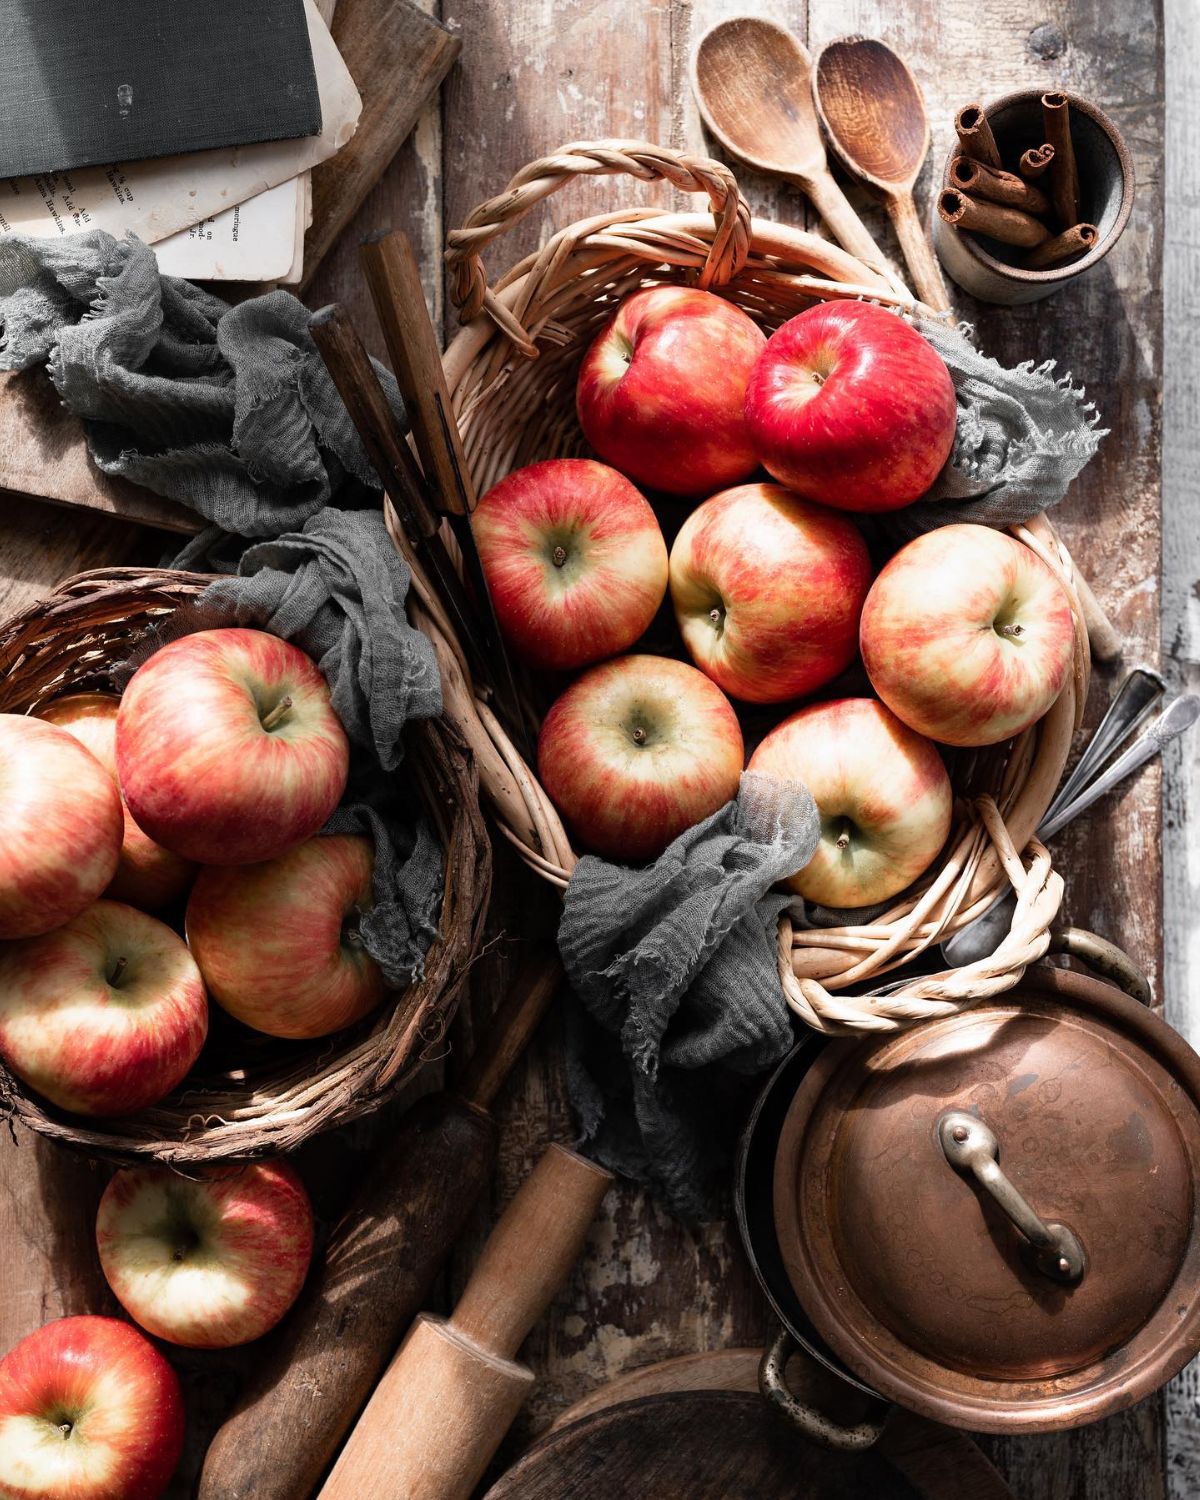 Basket of apple on wood table next to baking tools.